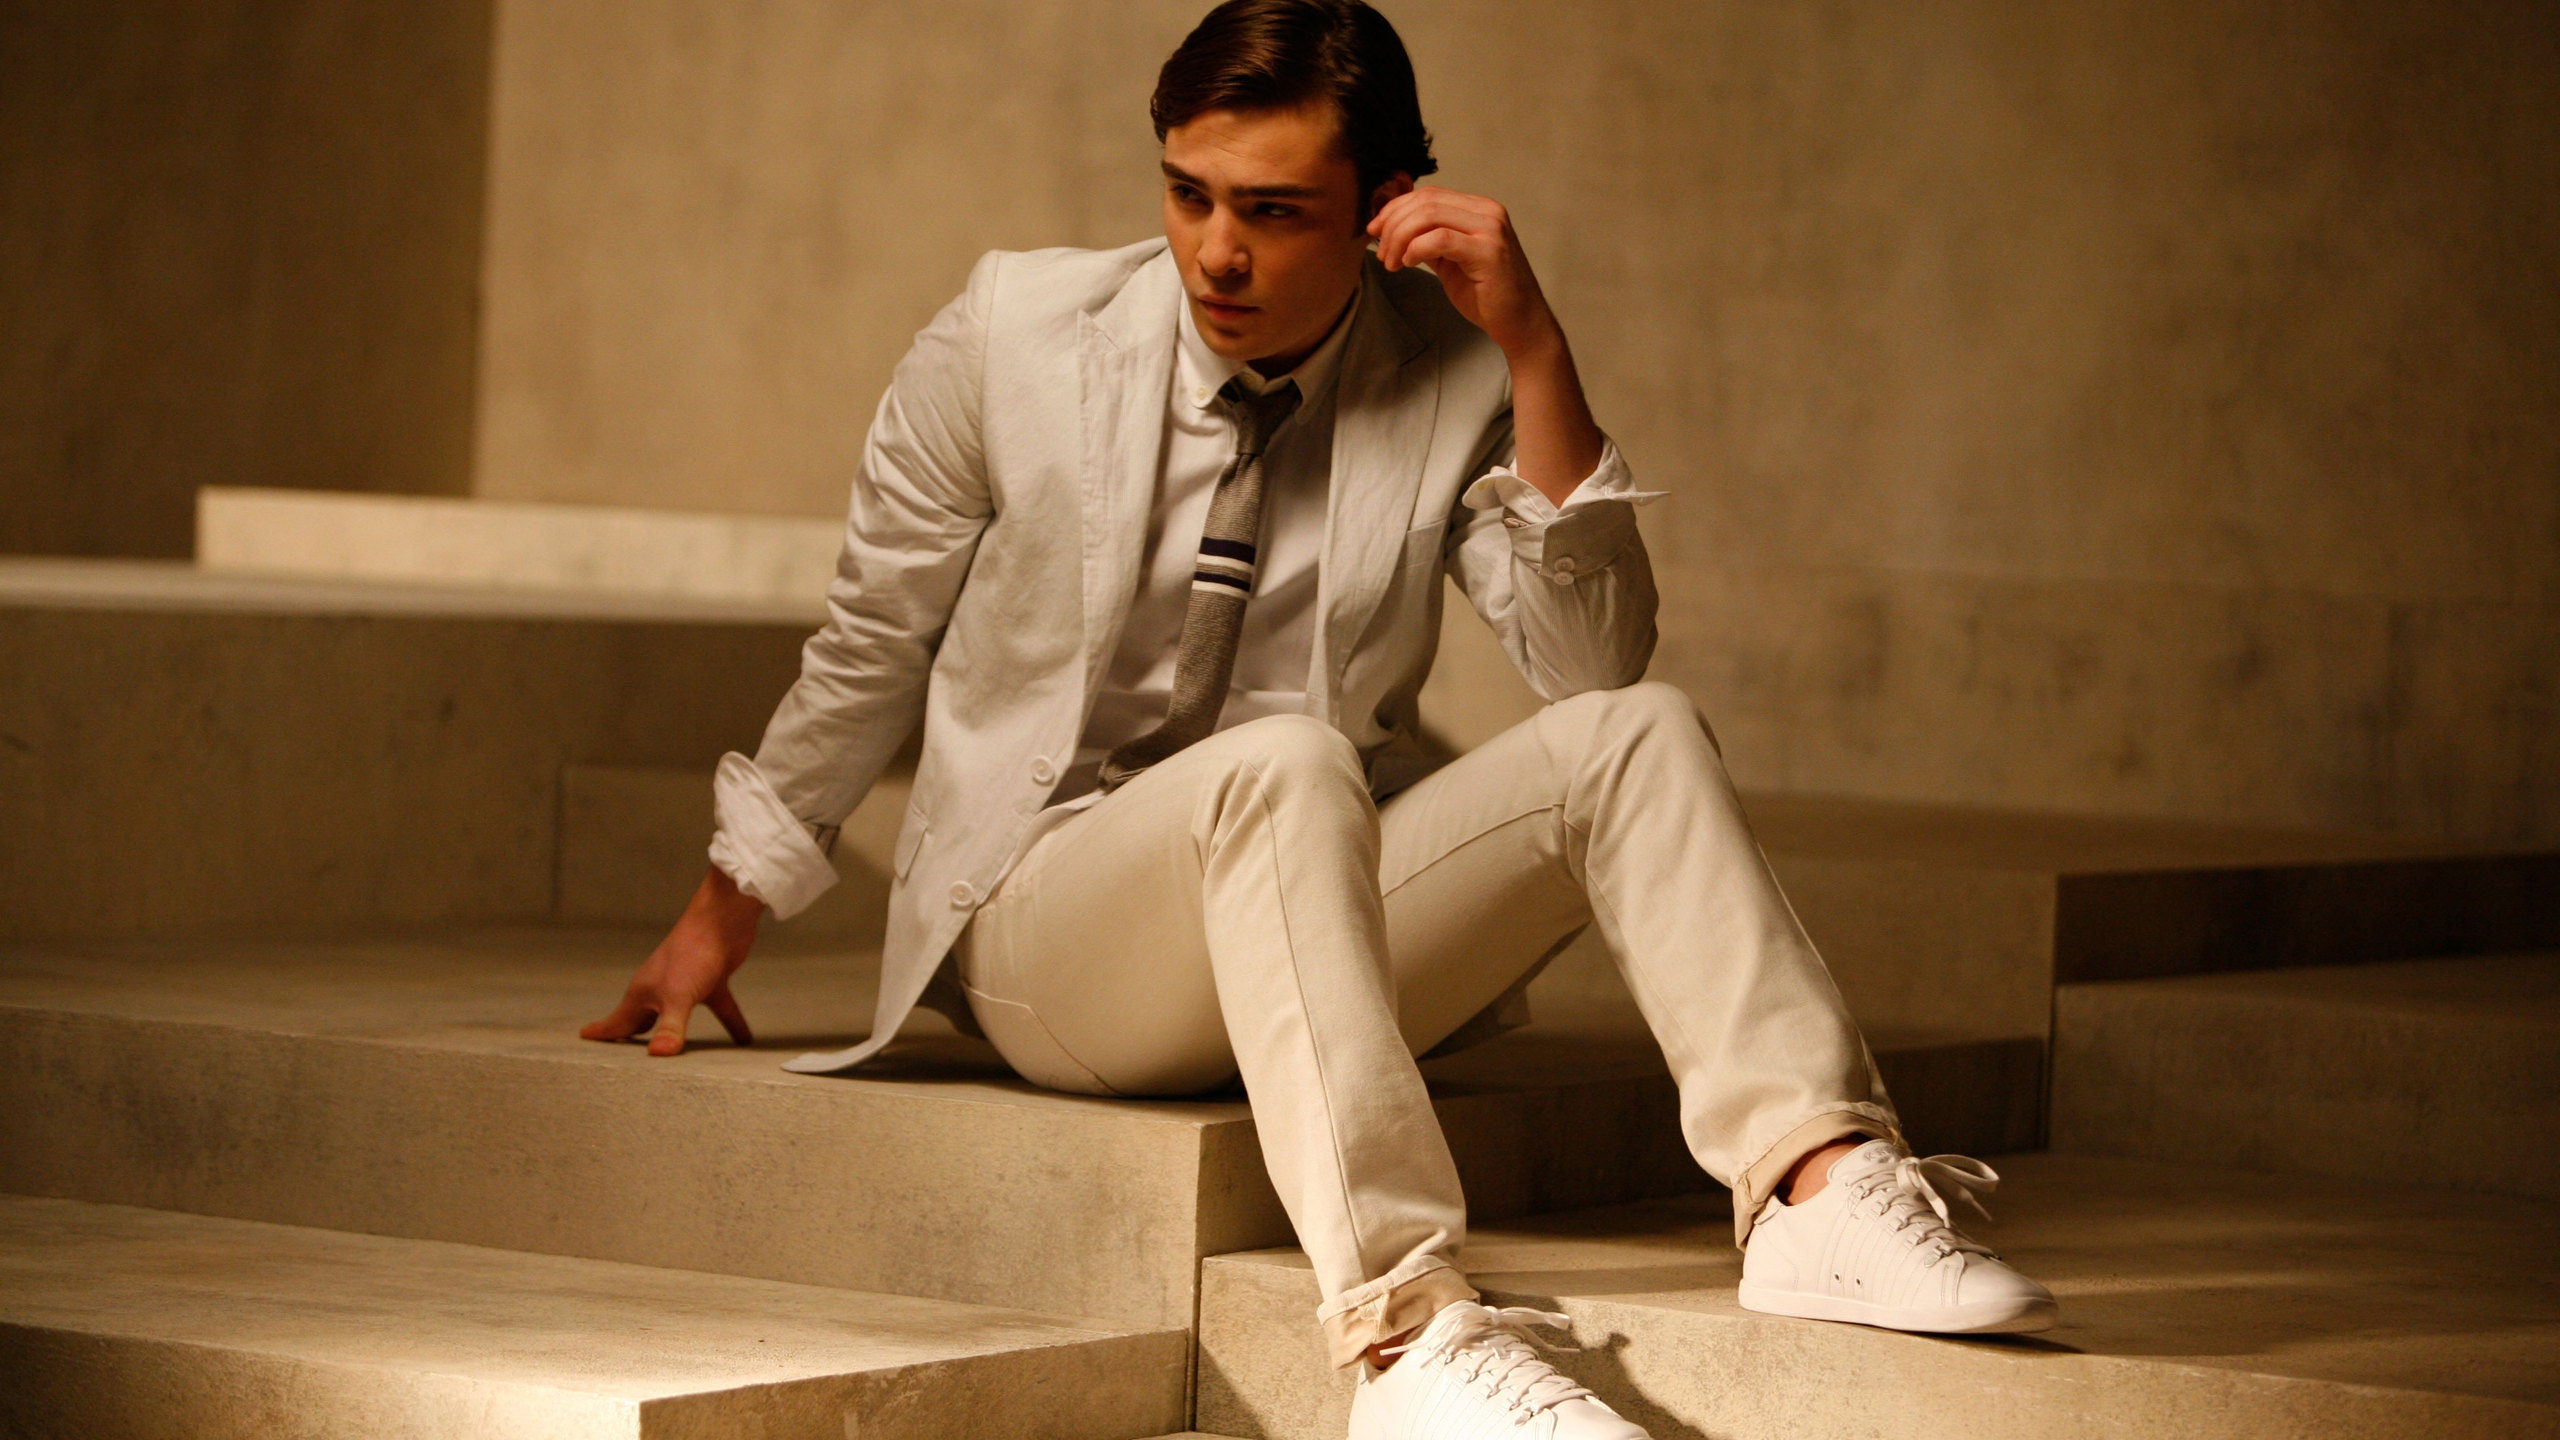 Ed Westwick for 2560x1440 HDTV resolution